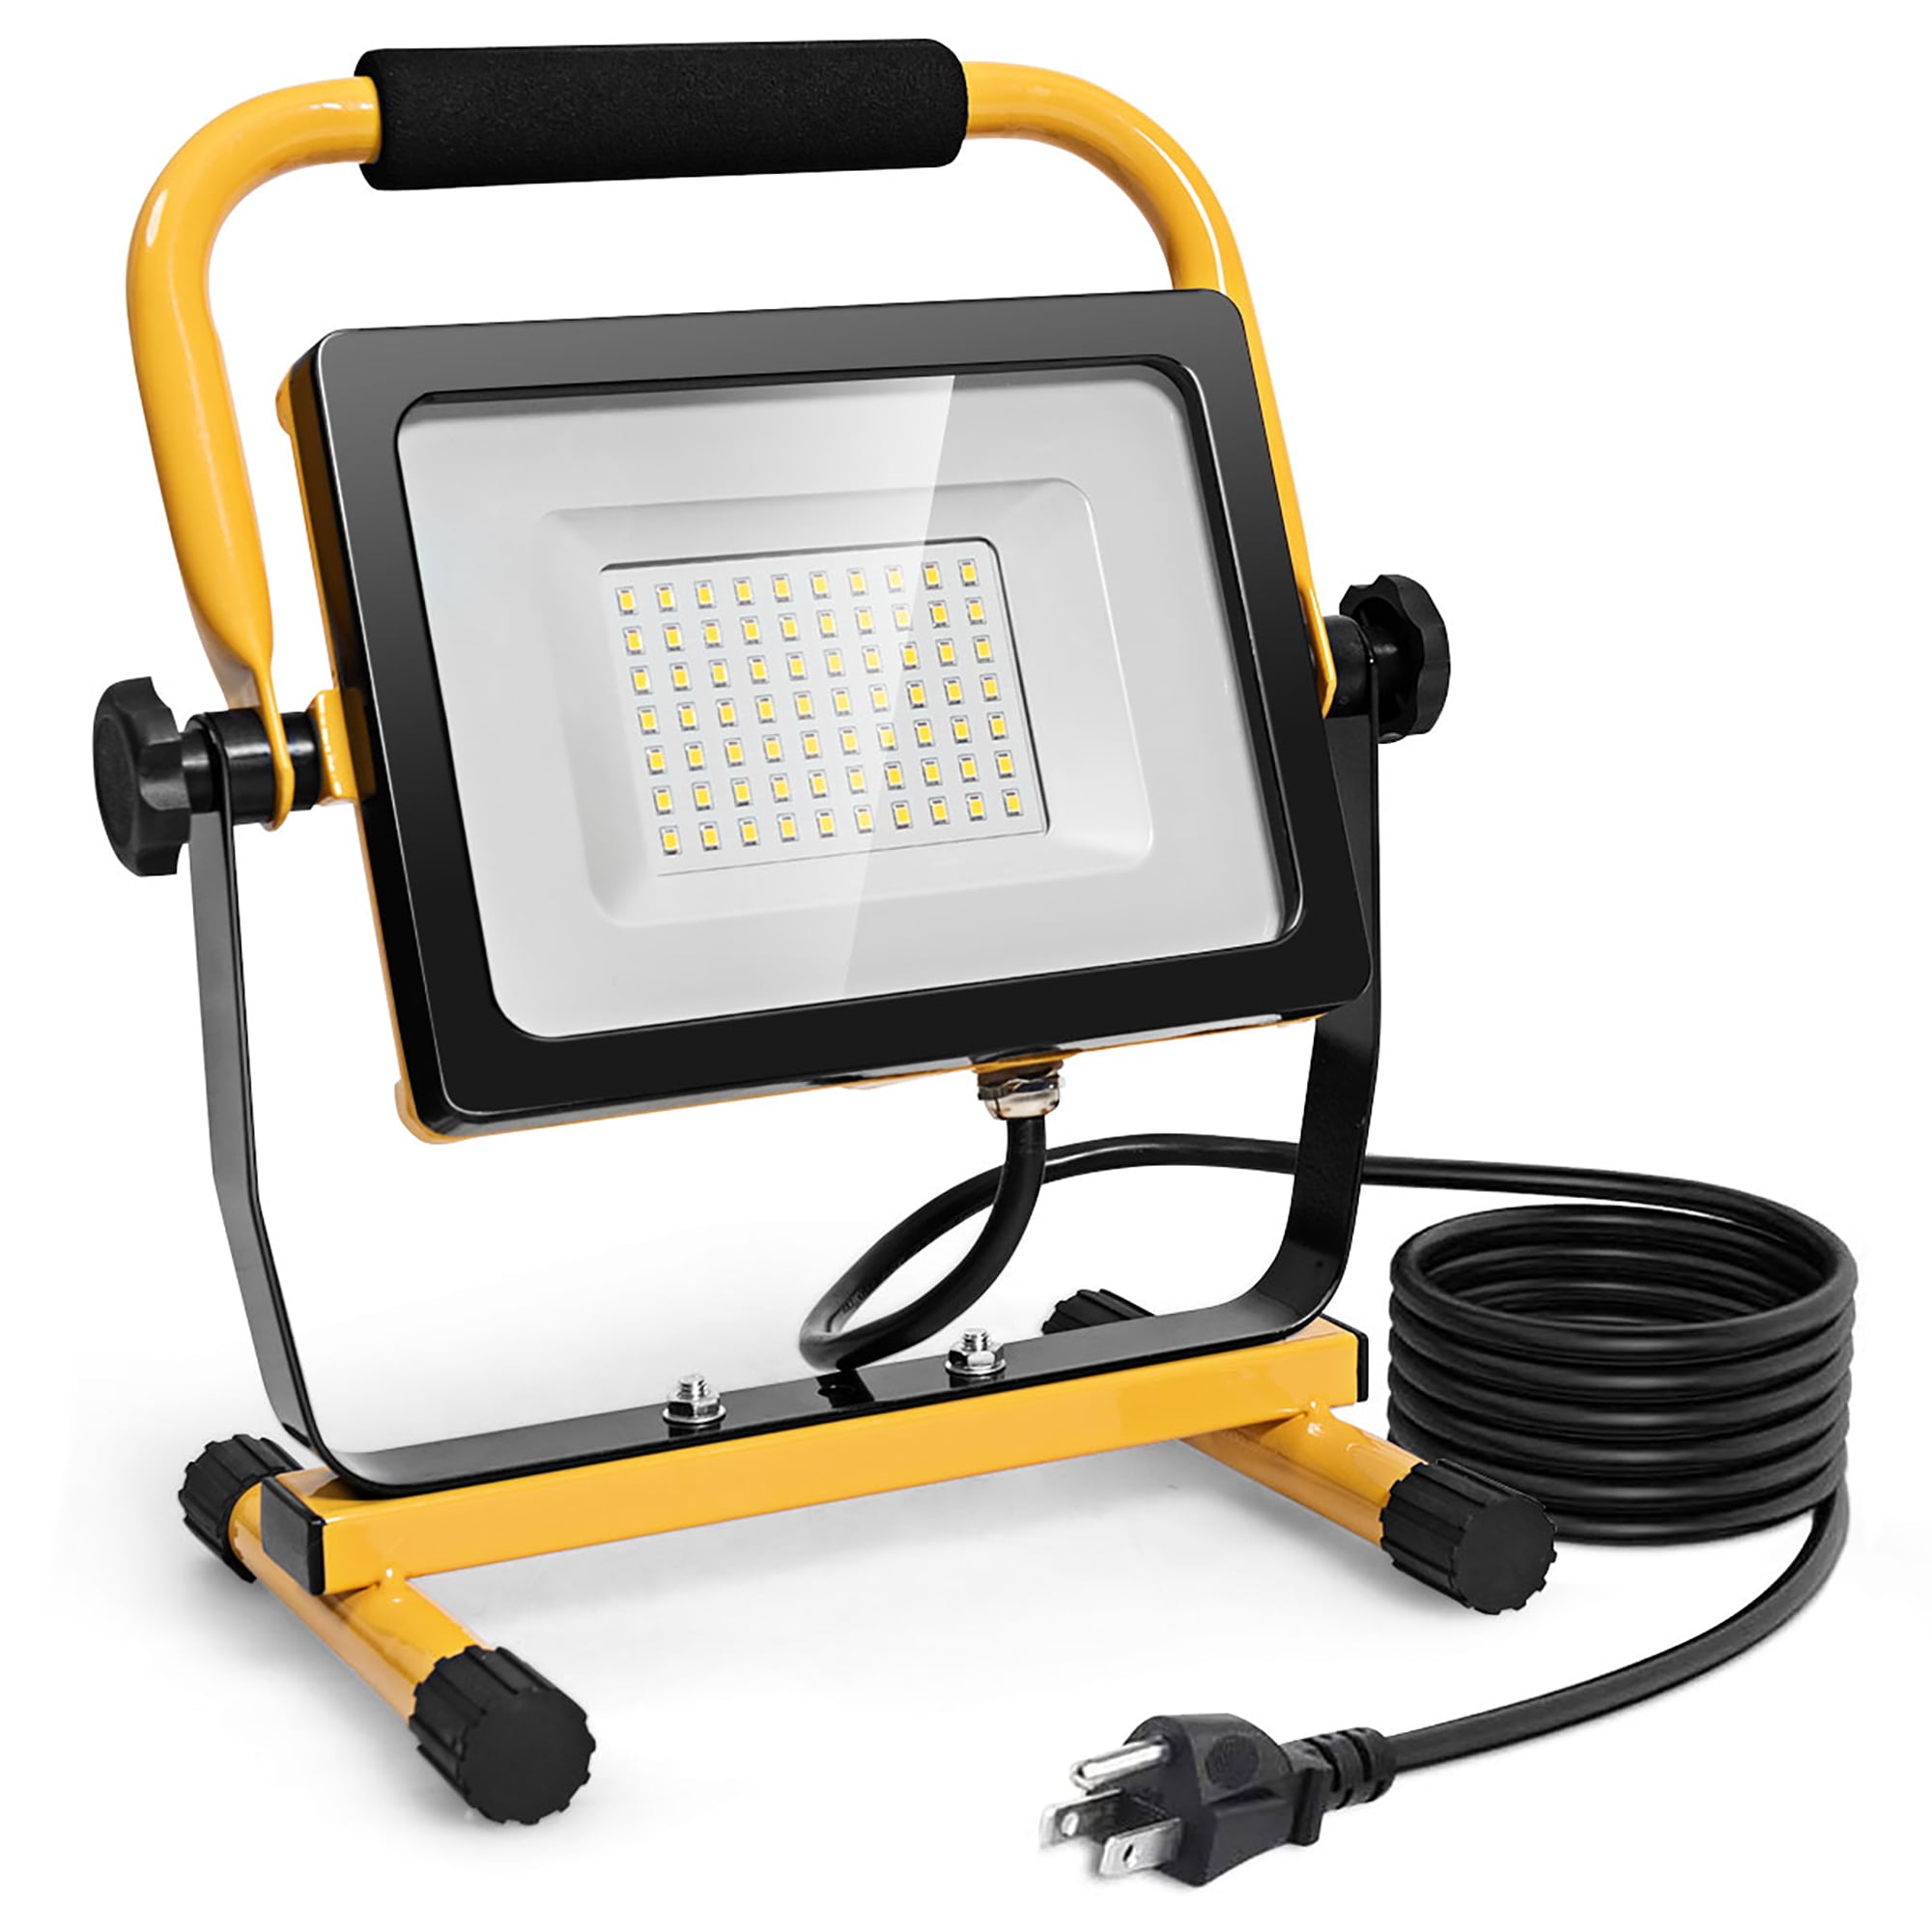 Waterproof Portable COB LED Work Light Rechargeable Garage Camping Spot Lamp100W 